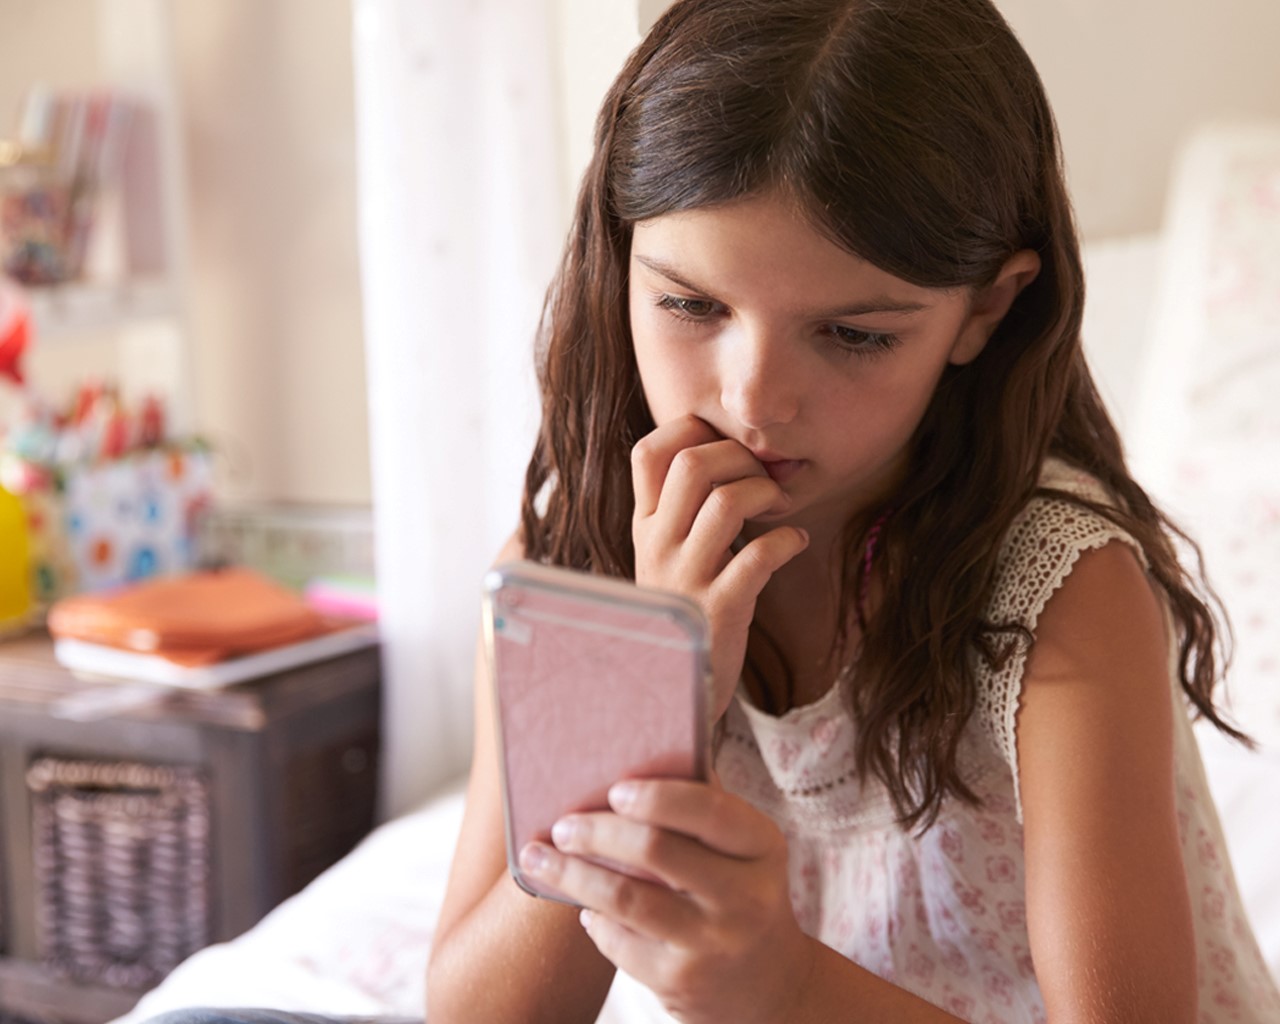 A child views her mobile phone with a worried expression